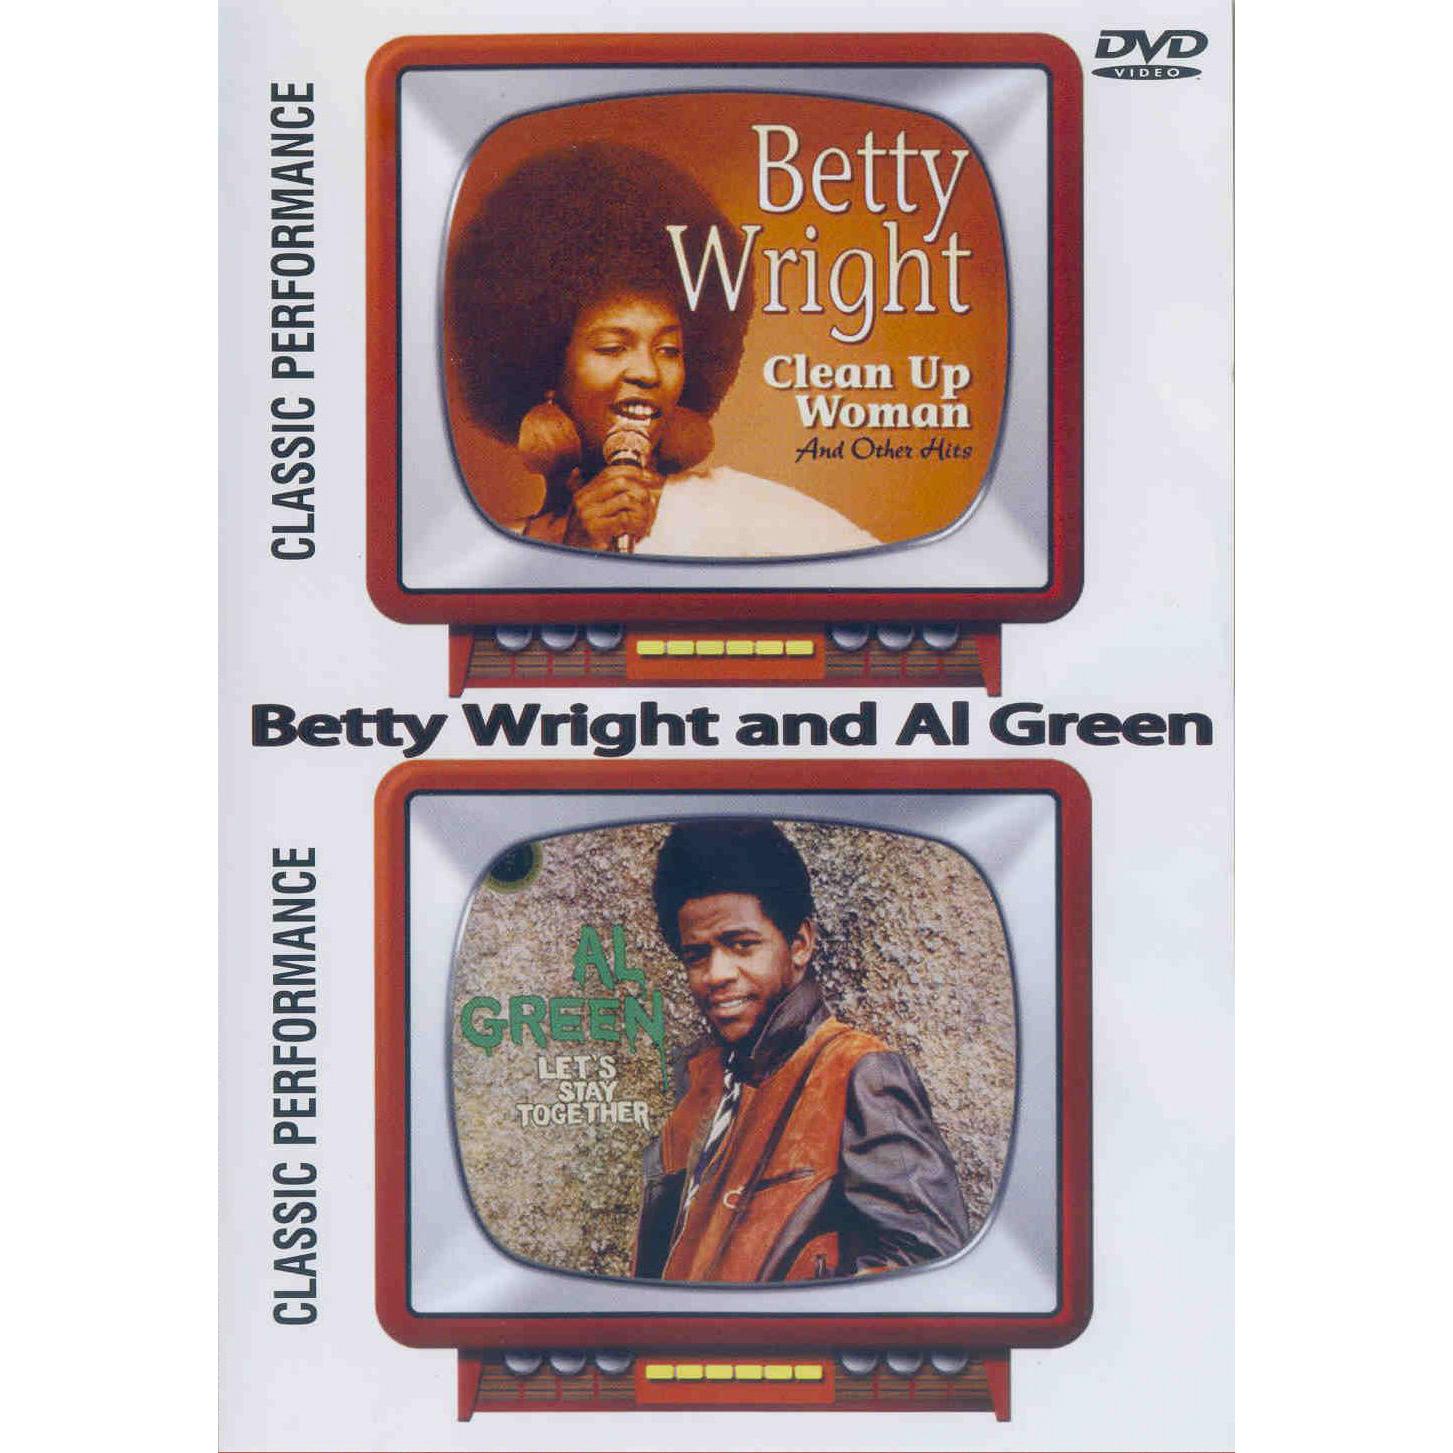 DVD - Betty Wright and Al Green - Classic Performance é bom? Vale a pena?